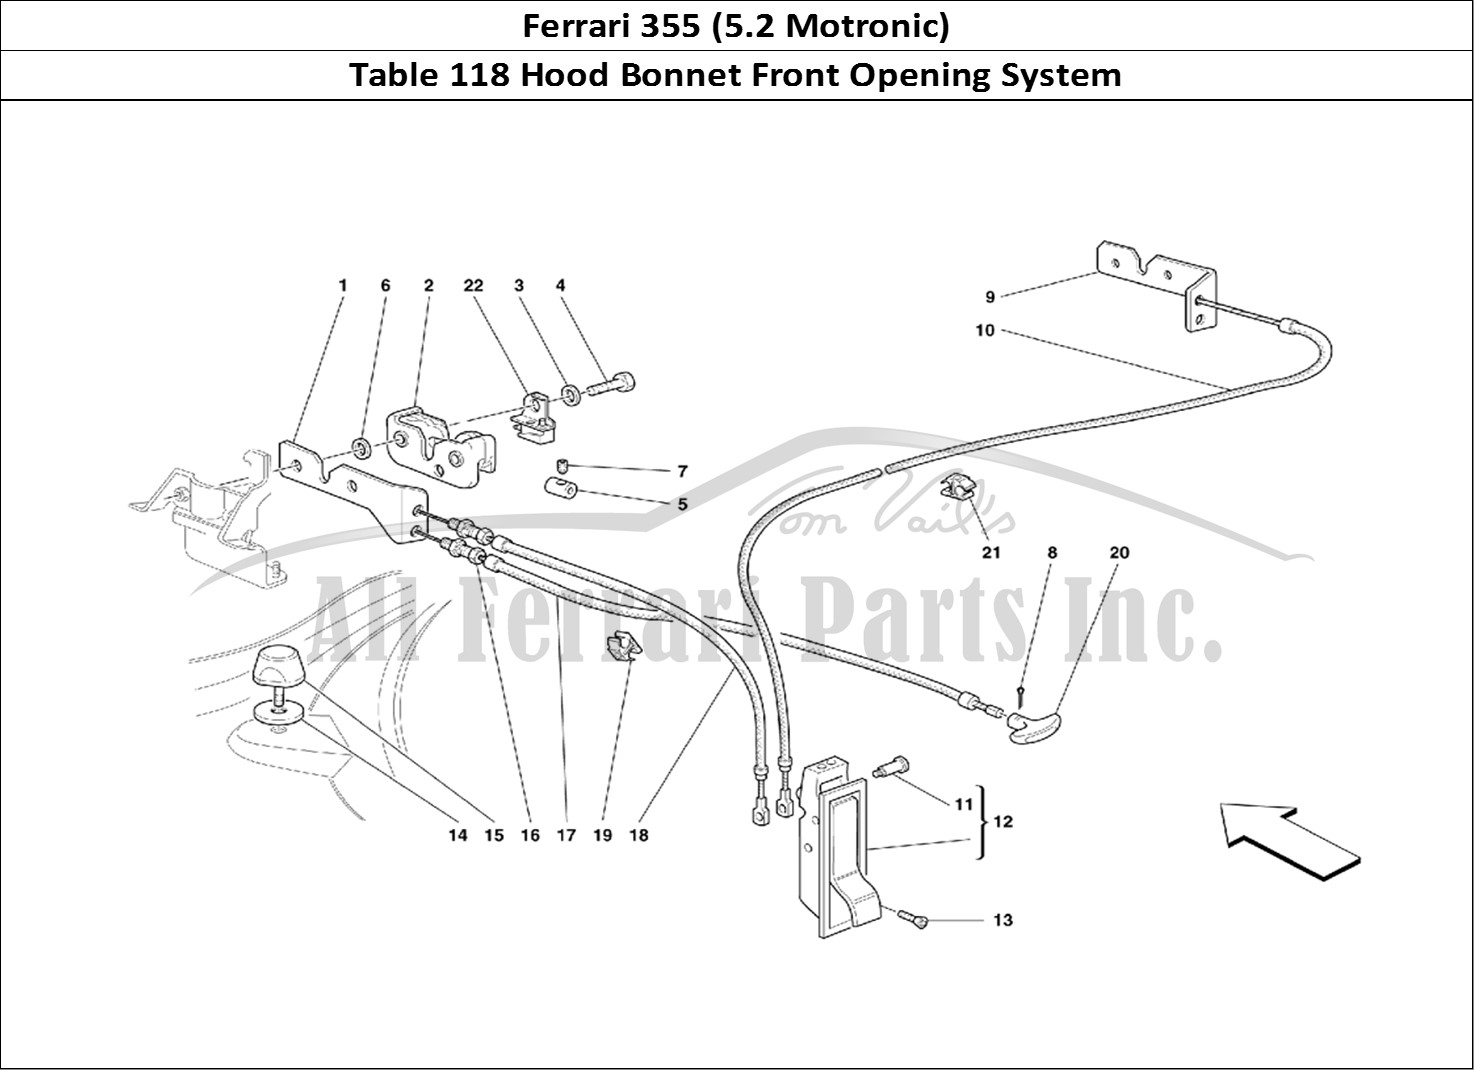 Ferrari Parts Ferrari 355 (5.2 Motronic) Page 118 Opening Device for Front